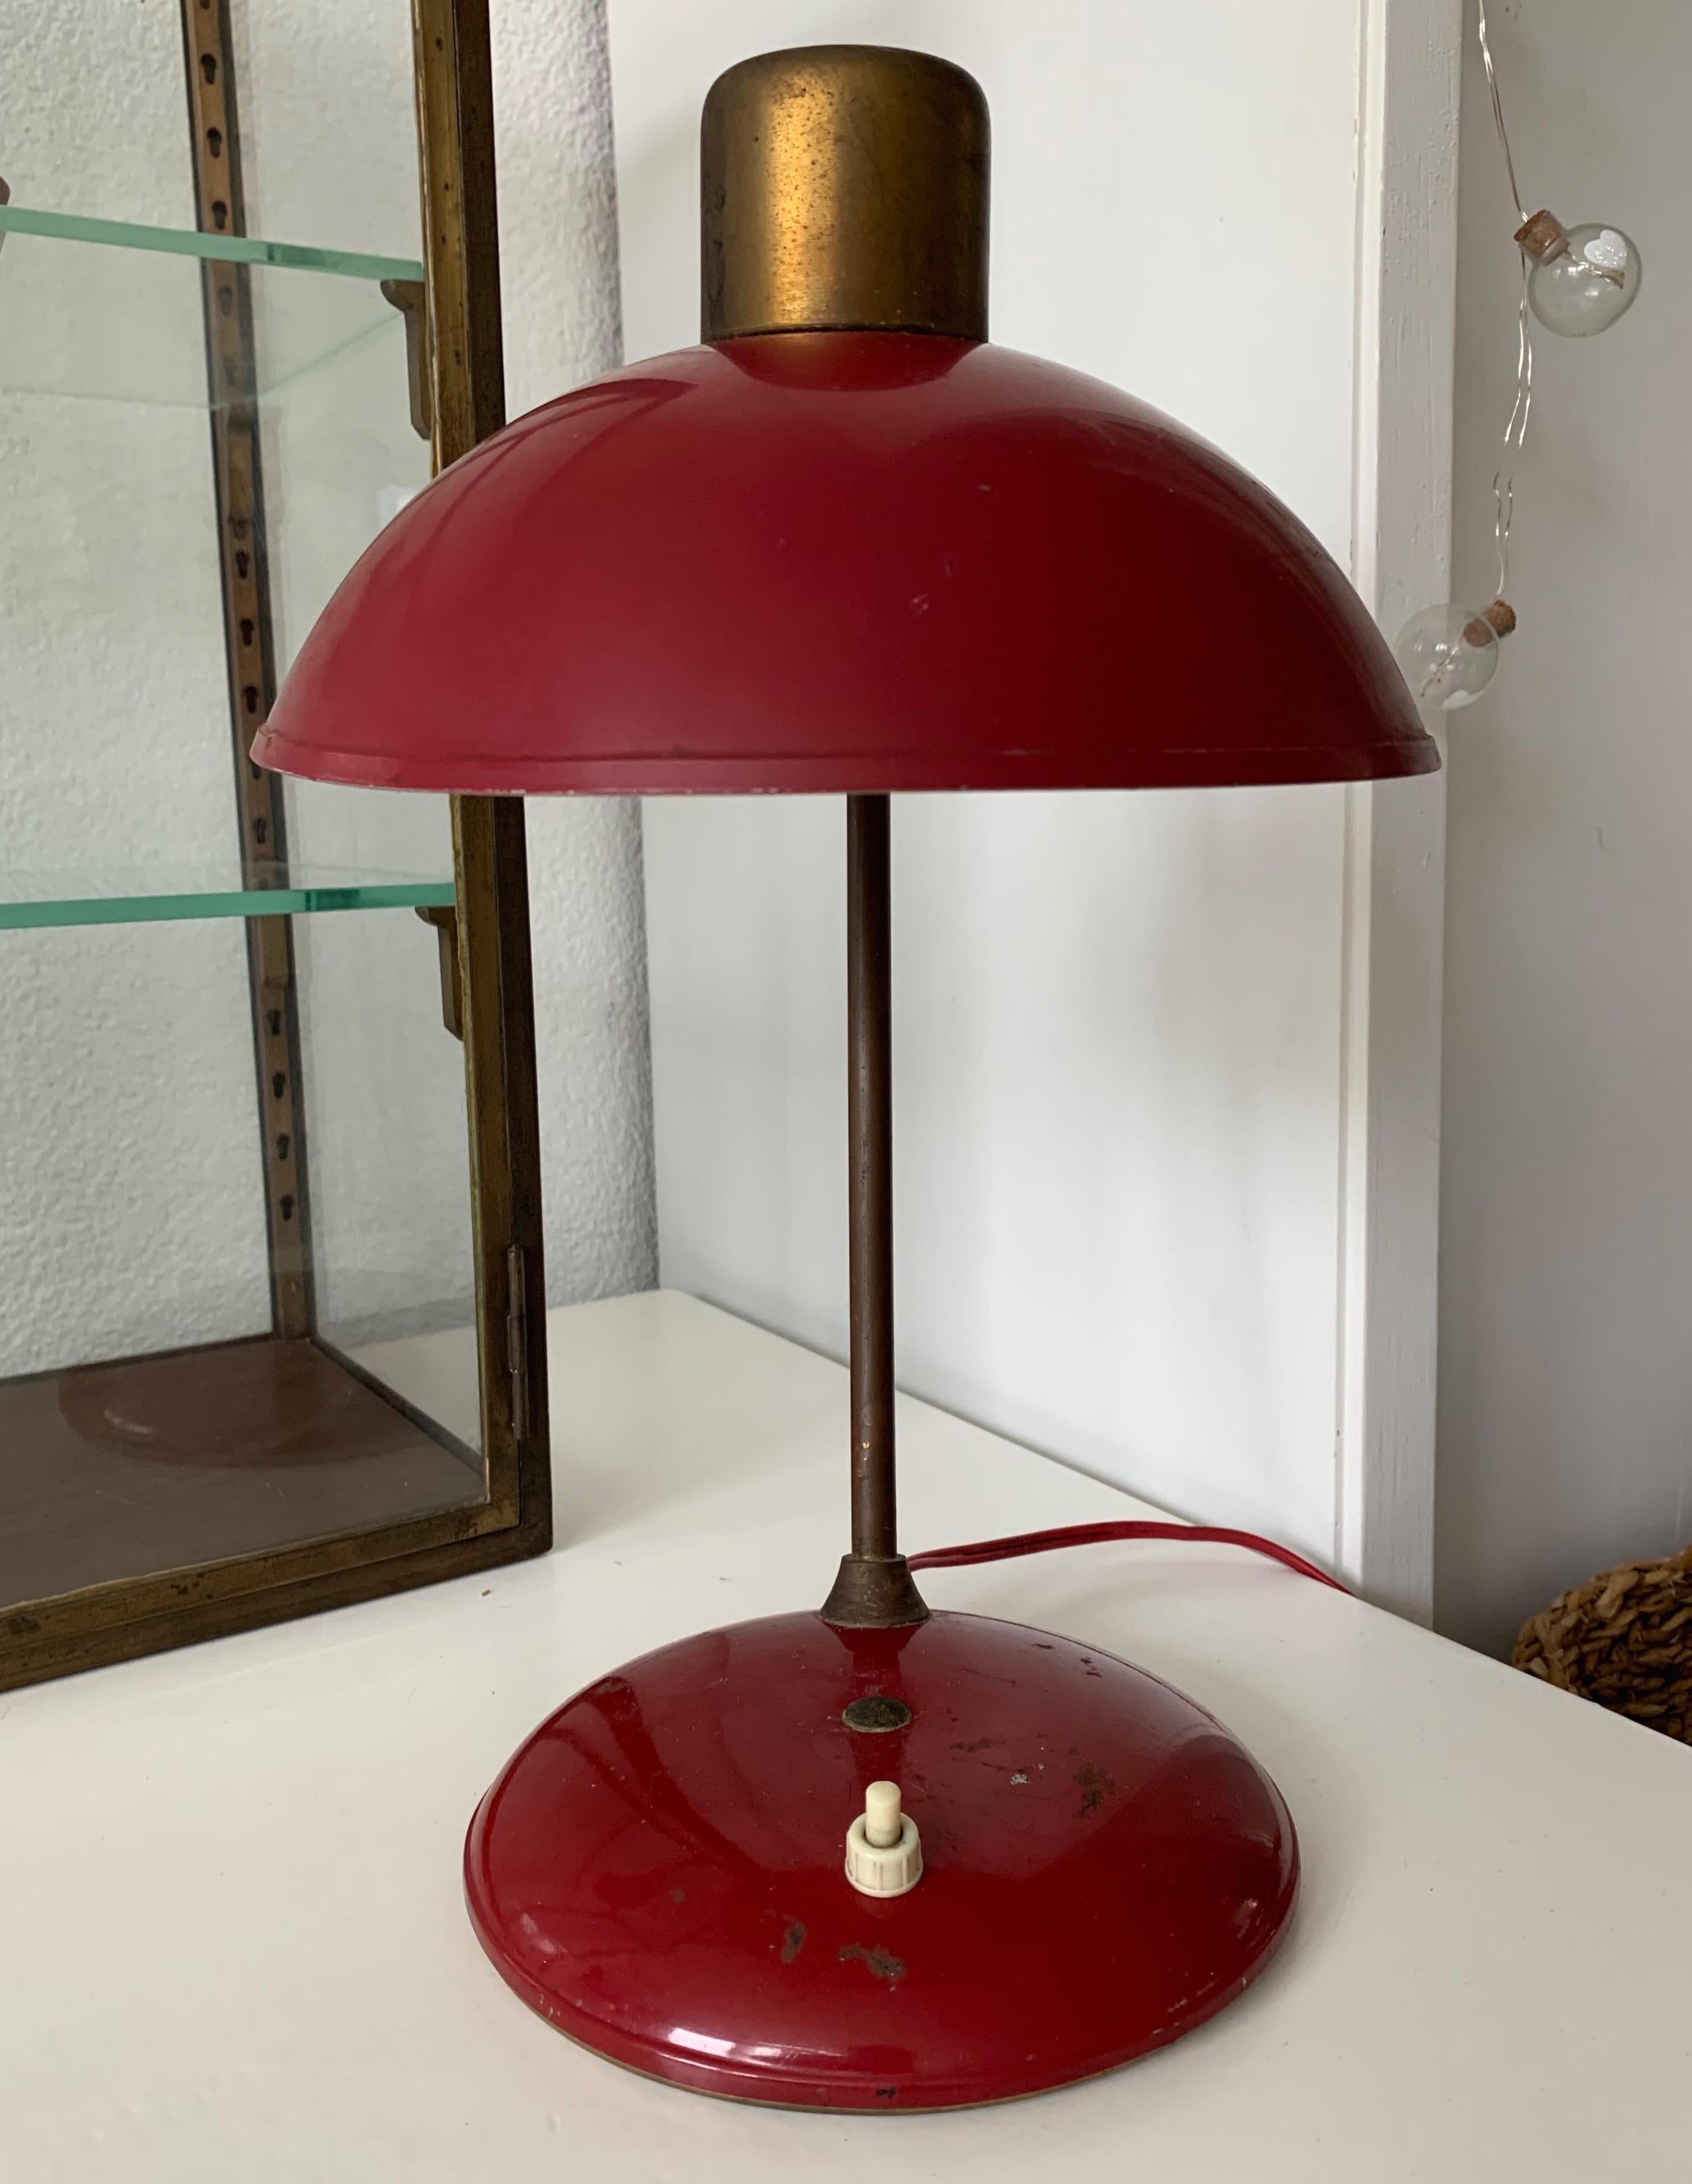 Timeless lamp for creating the perfect atmosphere on a table or desk, early 20th century

If you appreciate the Industrial look and feel of this Arts & Crafts era table lamp then this stylish little beauty could be flying your way soon. Thanks to